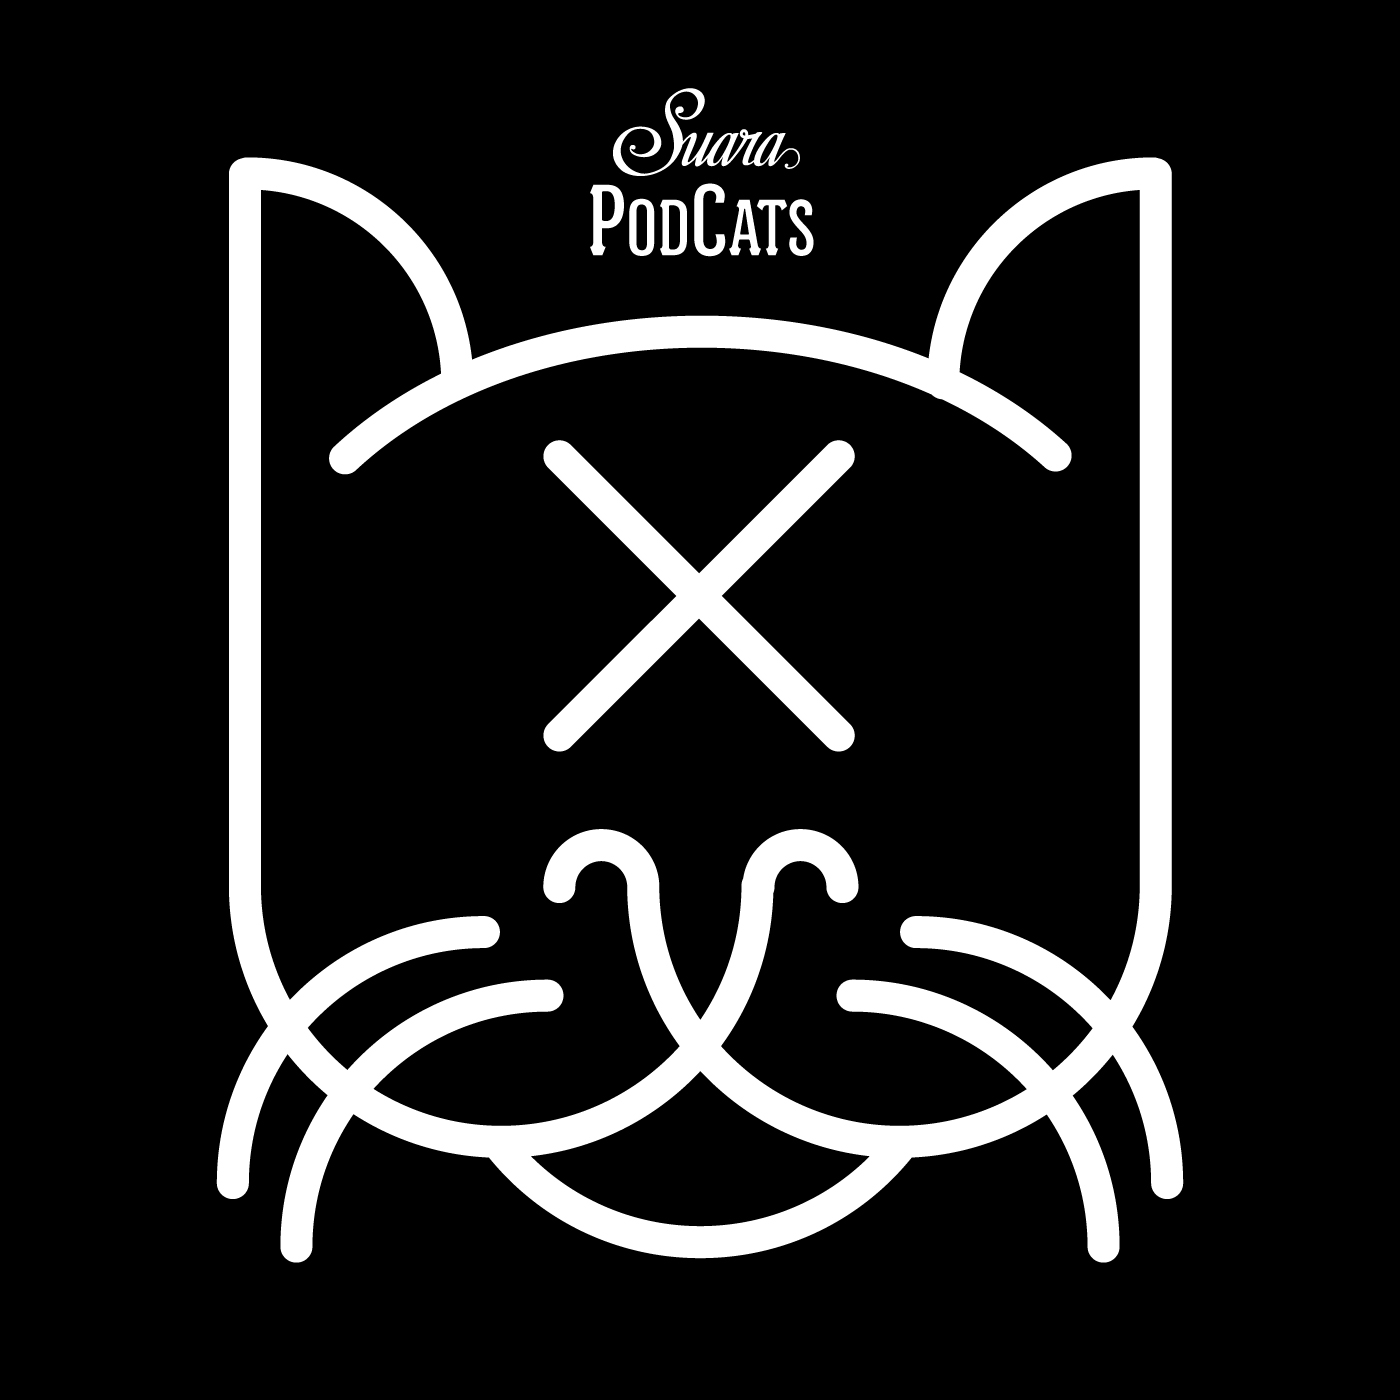 Delta Podcasts - Suara PodCats by Coyu (02.07.2018)